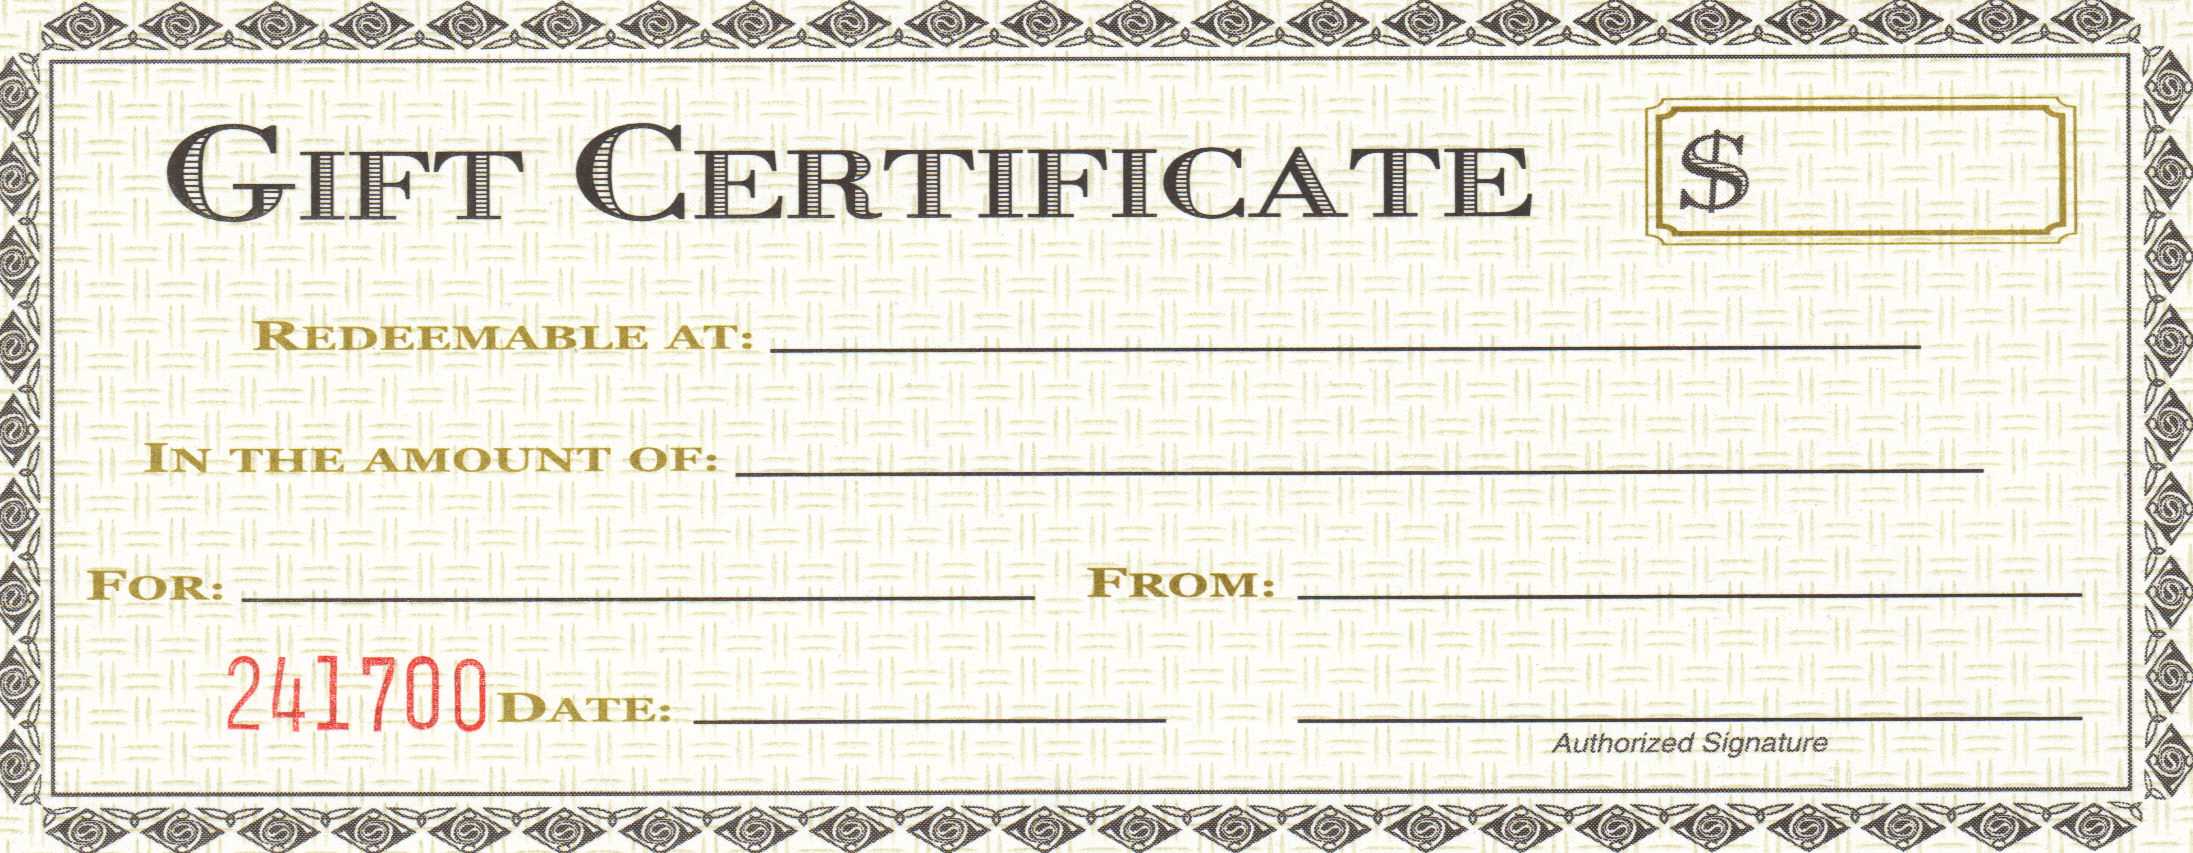 28 Cool Printable Gift Certificates | Kittybabylove Intended For Generic Certificate Template